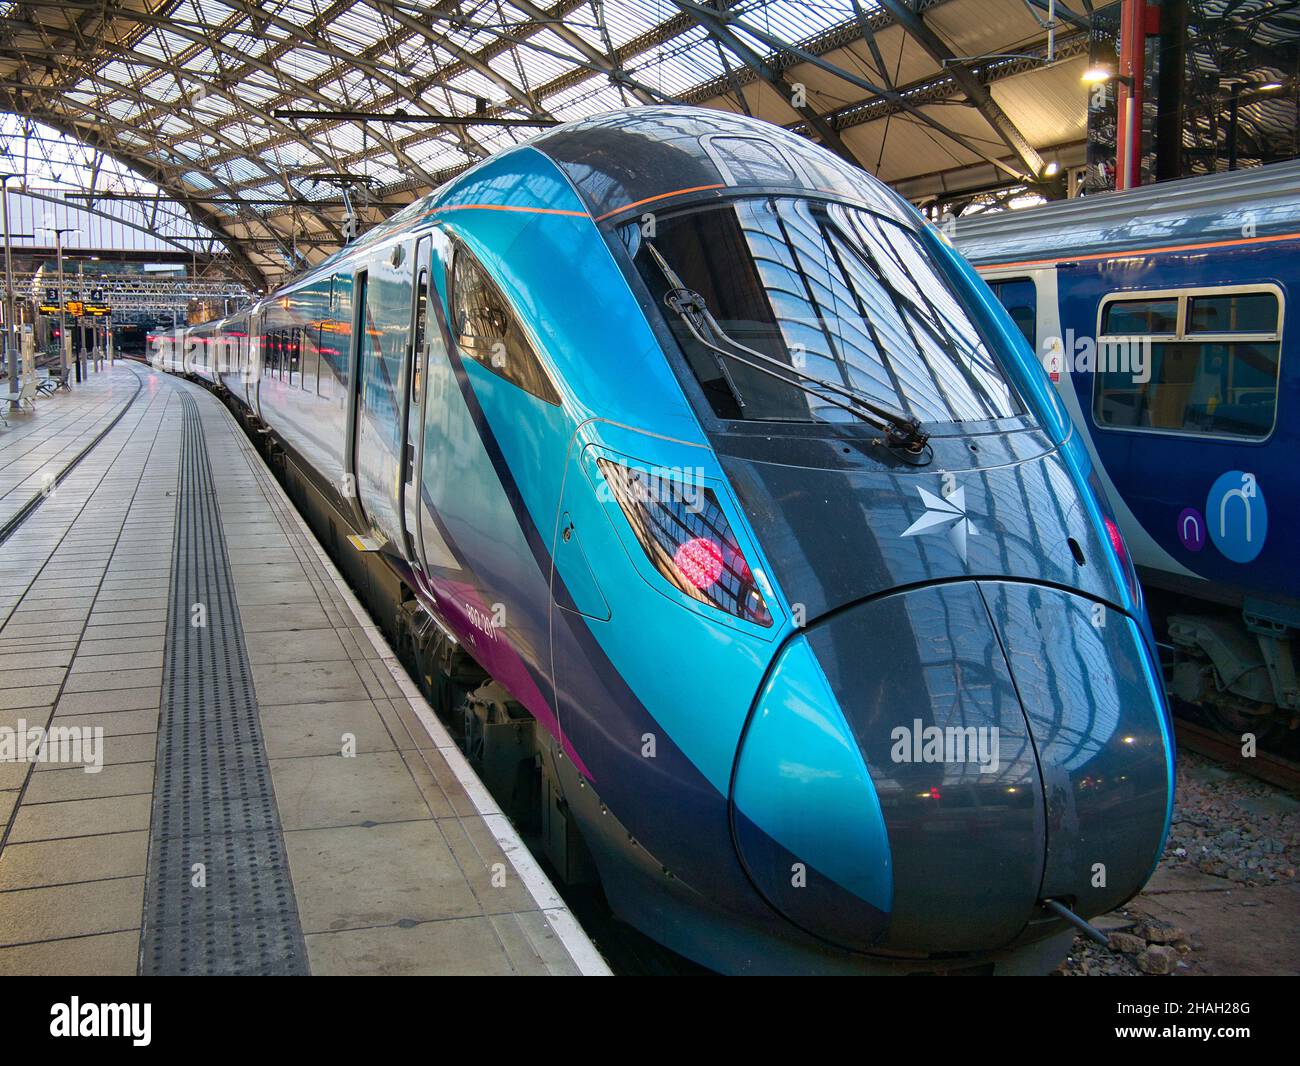 The engine of a TransPennine Express train at Lime Street Station in Liverpool, UK. The train is waiting for passengers to arrive before departing for Stock Photo